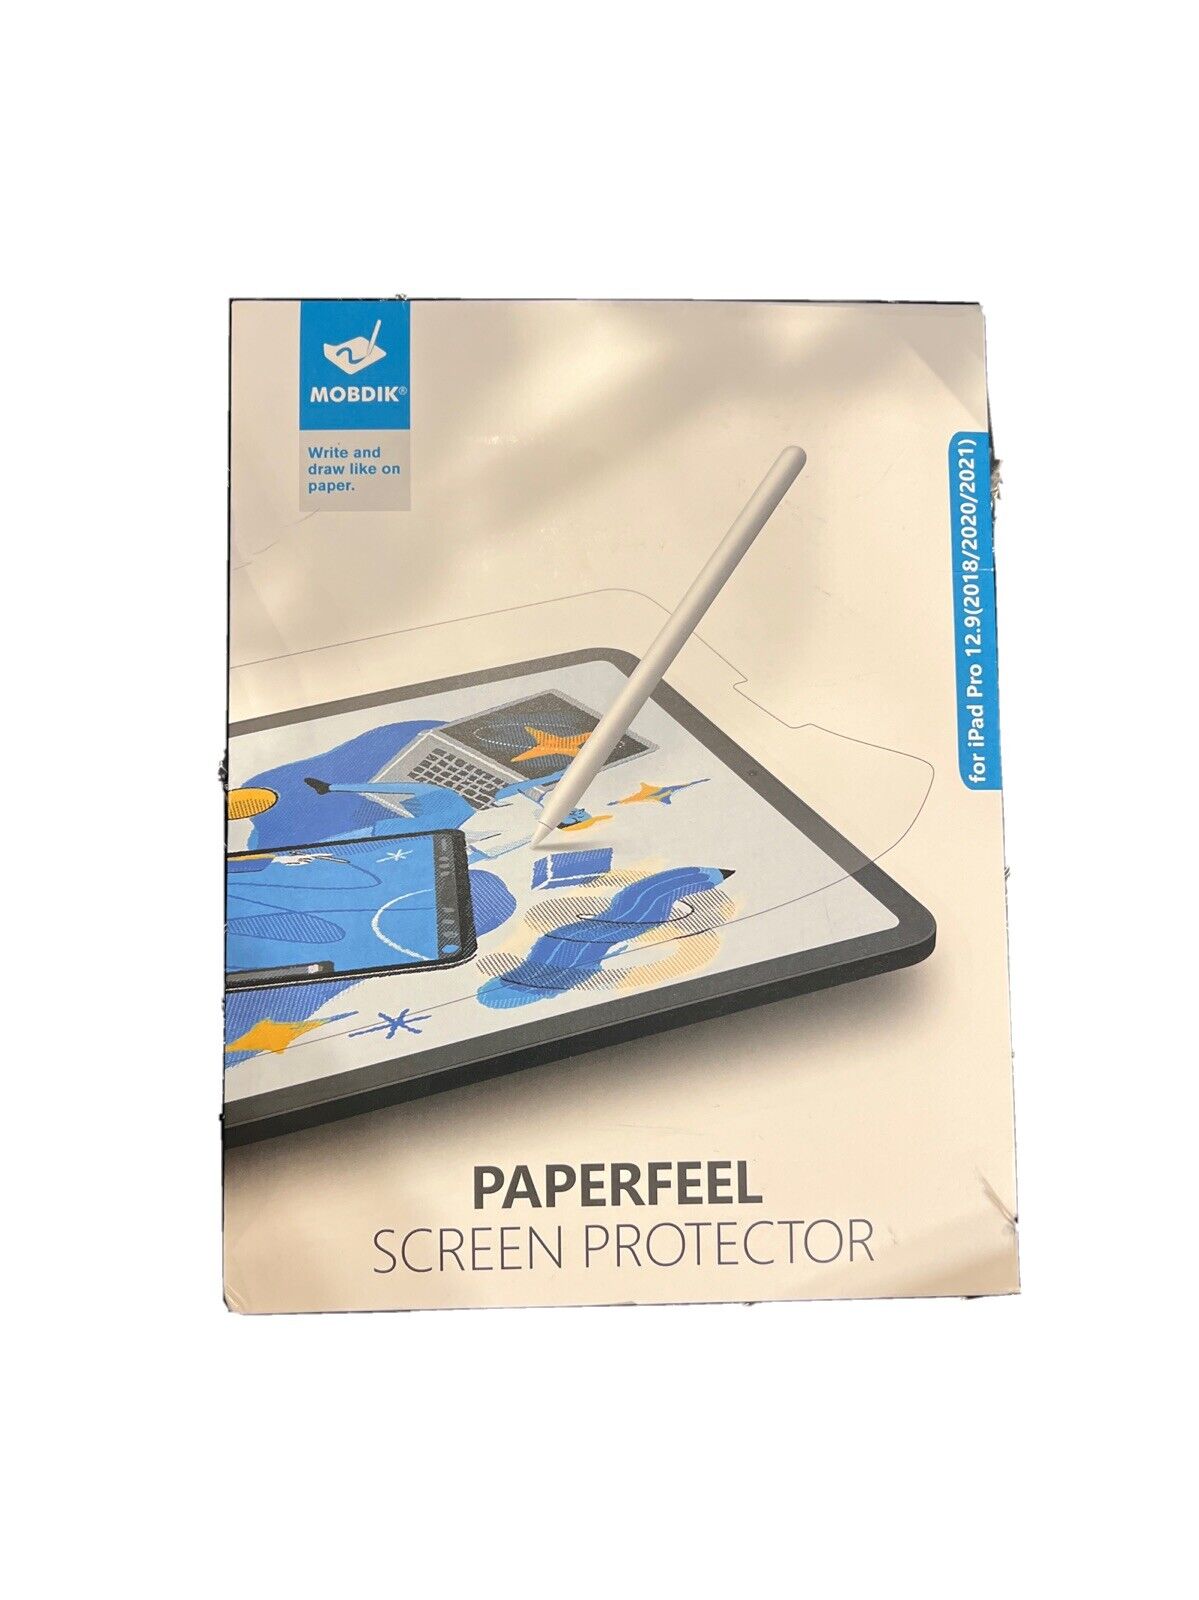 Mobdik Paperfeel Screen Protector For iPad Pro 12.9 Inch (2018/2020/2021) 2 Pack